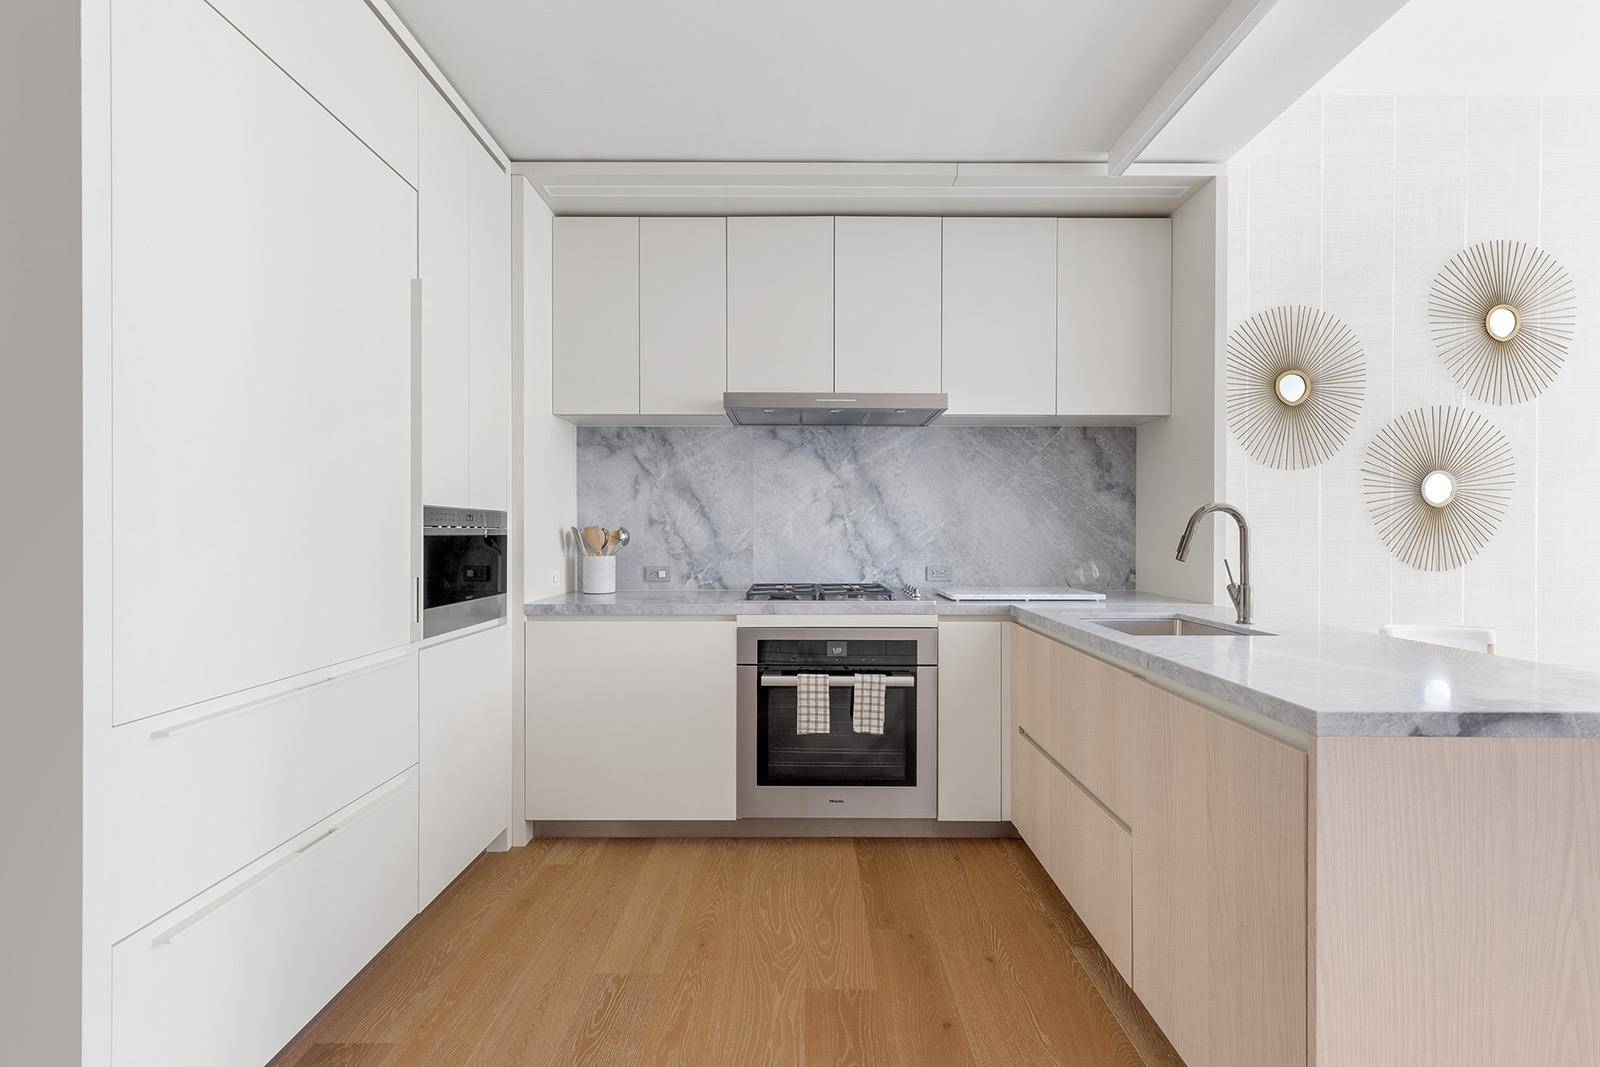 Immediate Occupancy Model Residences Open by AppointmentIntroducing 77 Greenwich St Views You ll DREAM about.